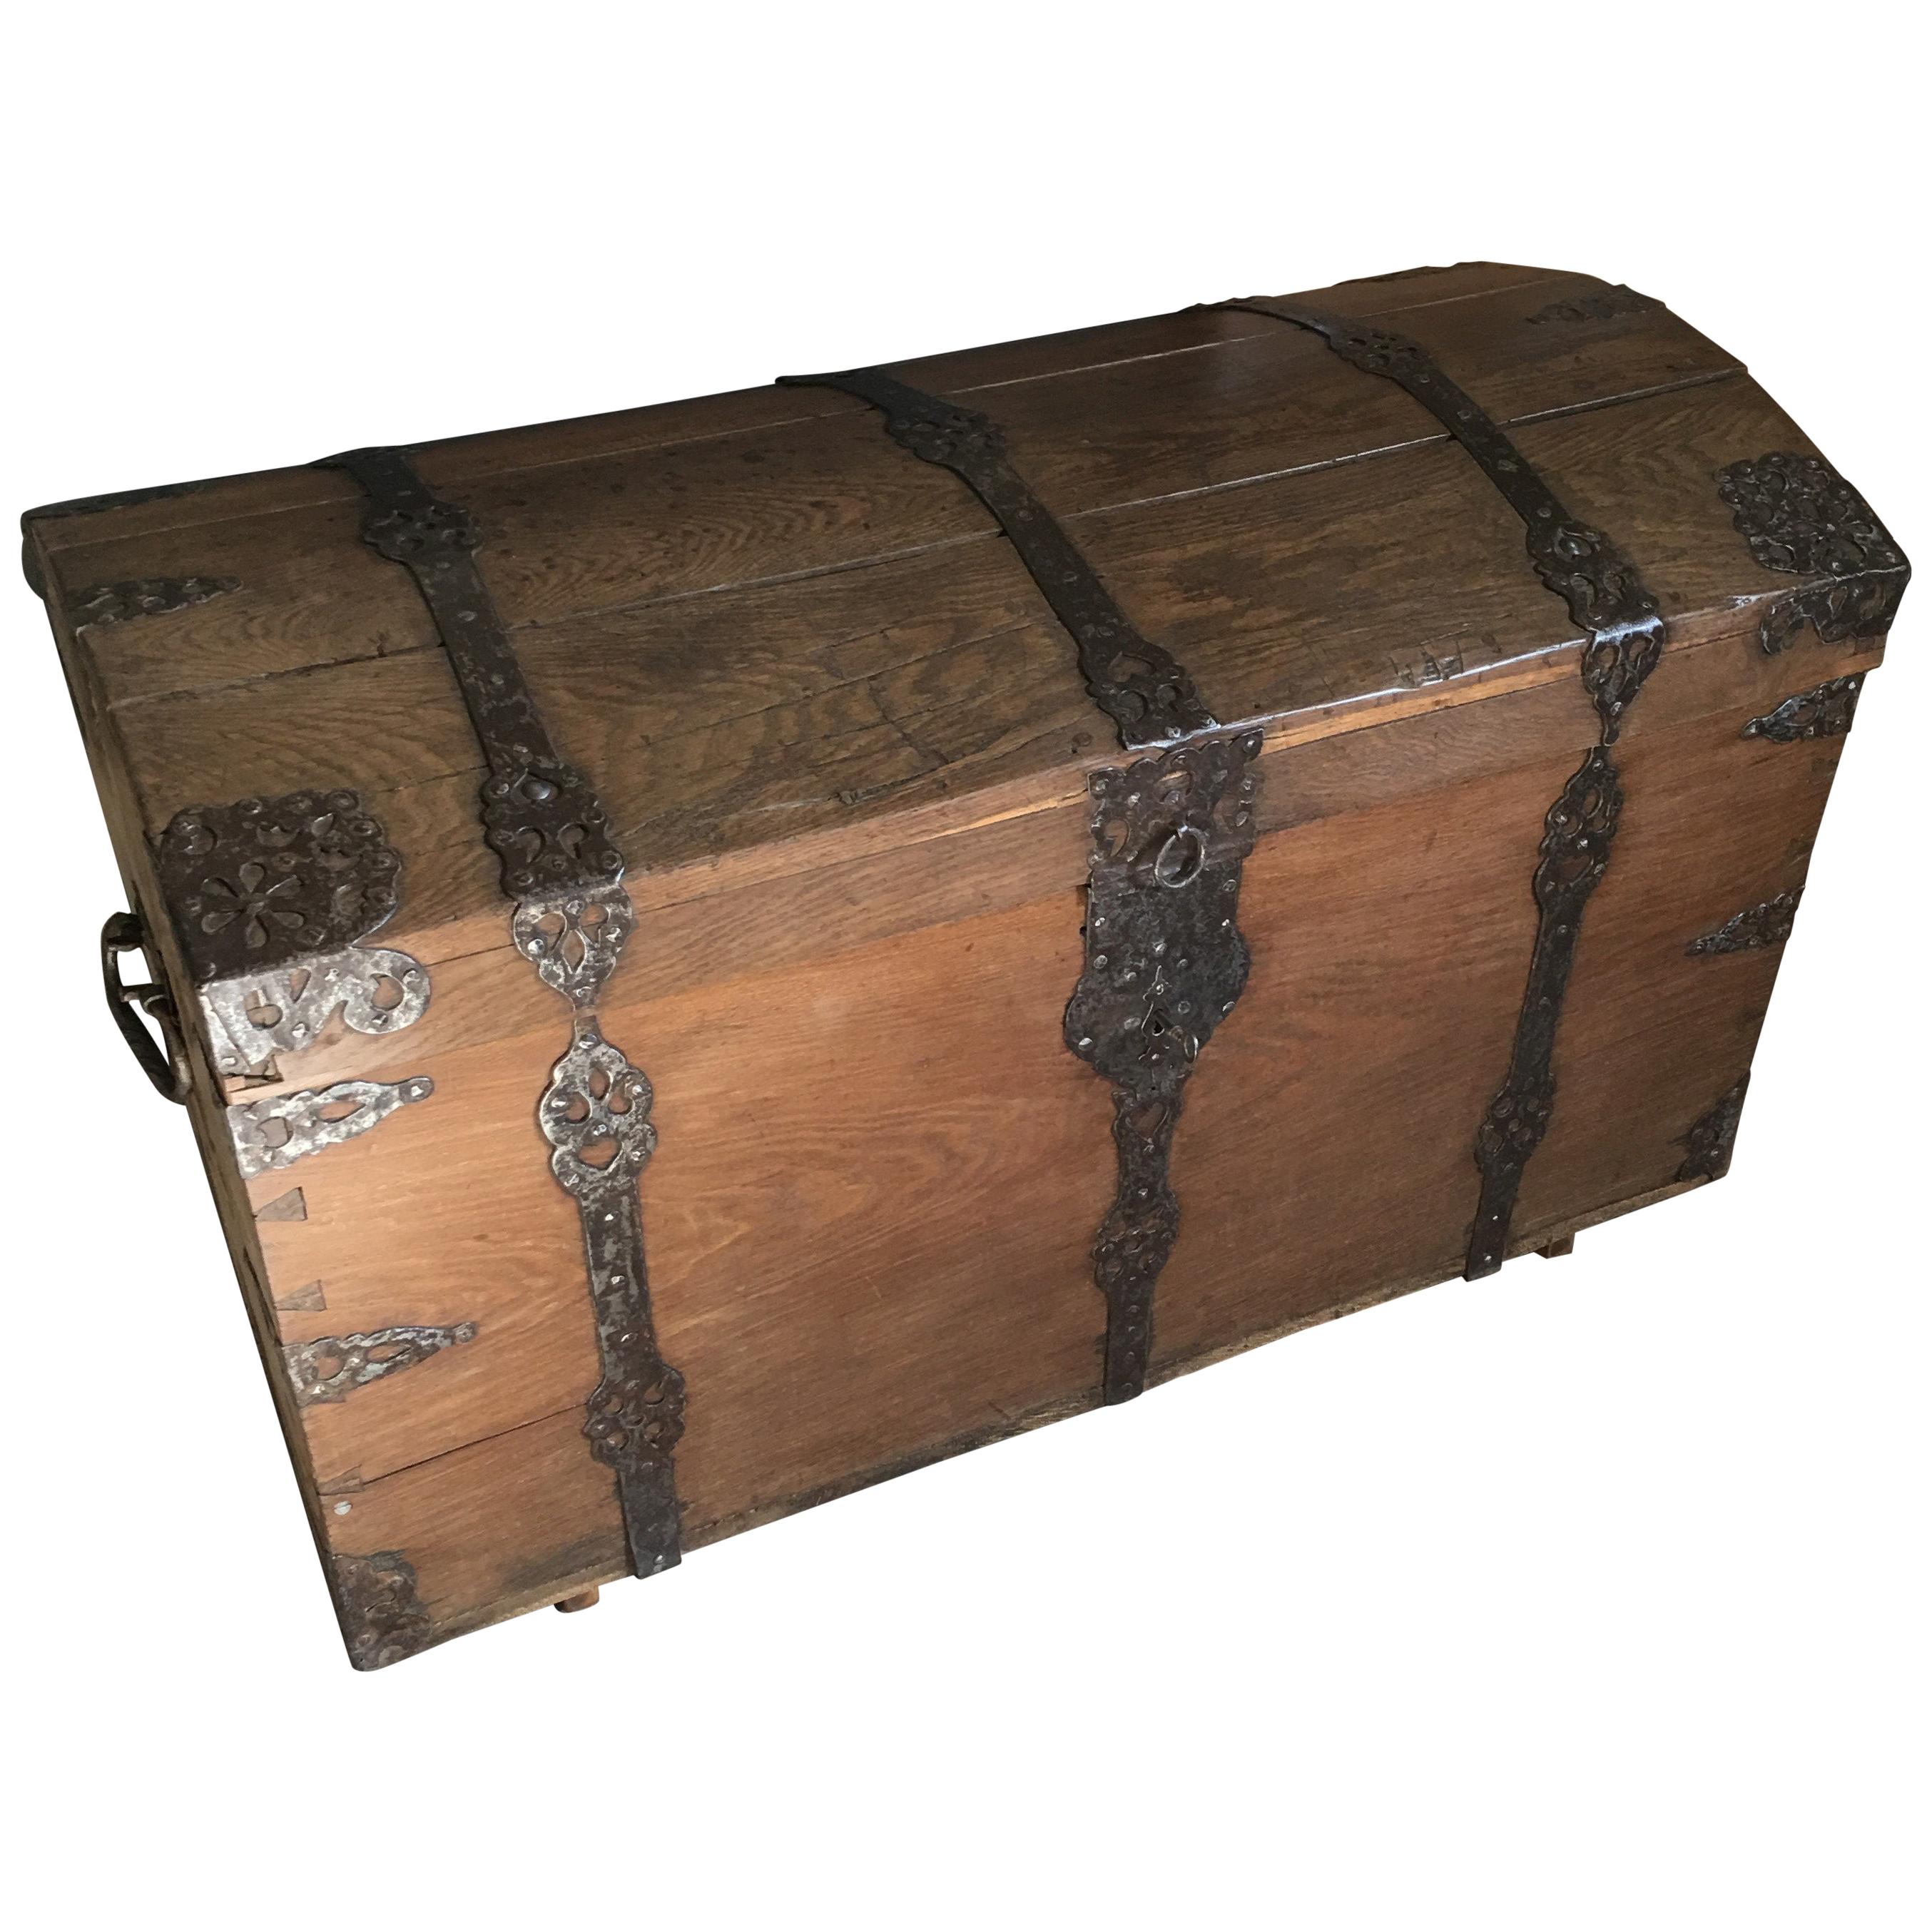 1700s Barock Round Lid Oak Wood Chest with Iron Decorations from Germany For Sale